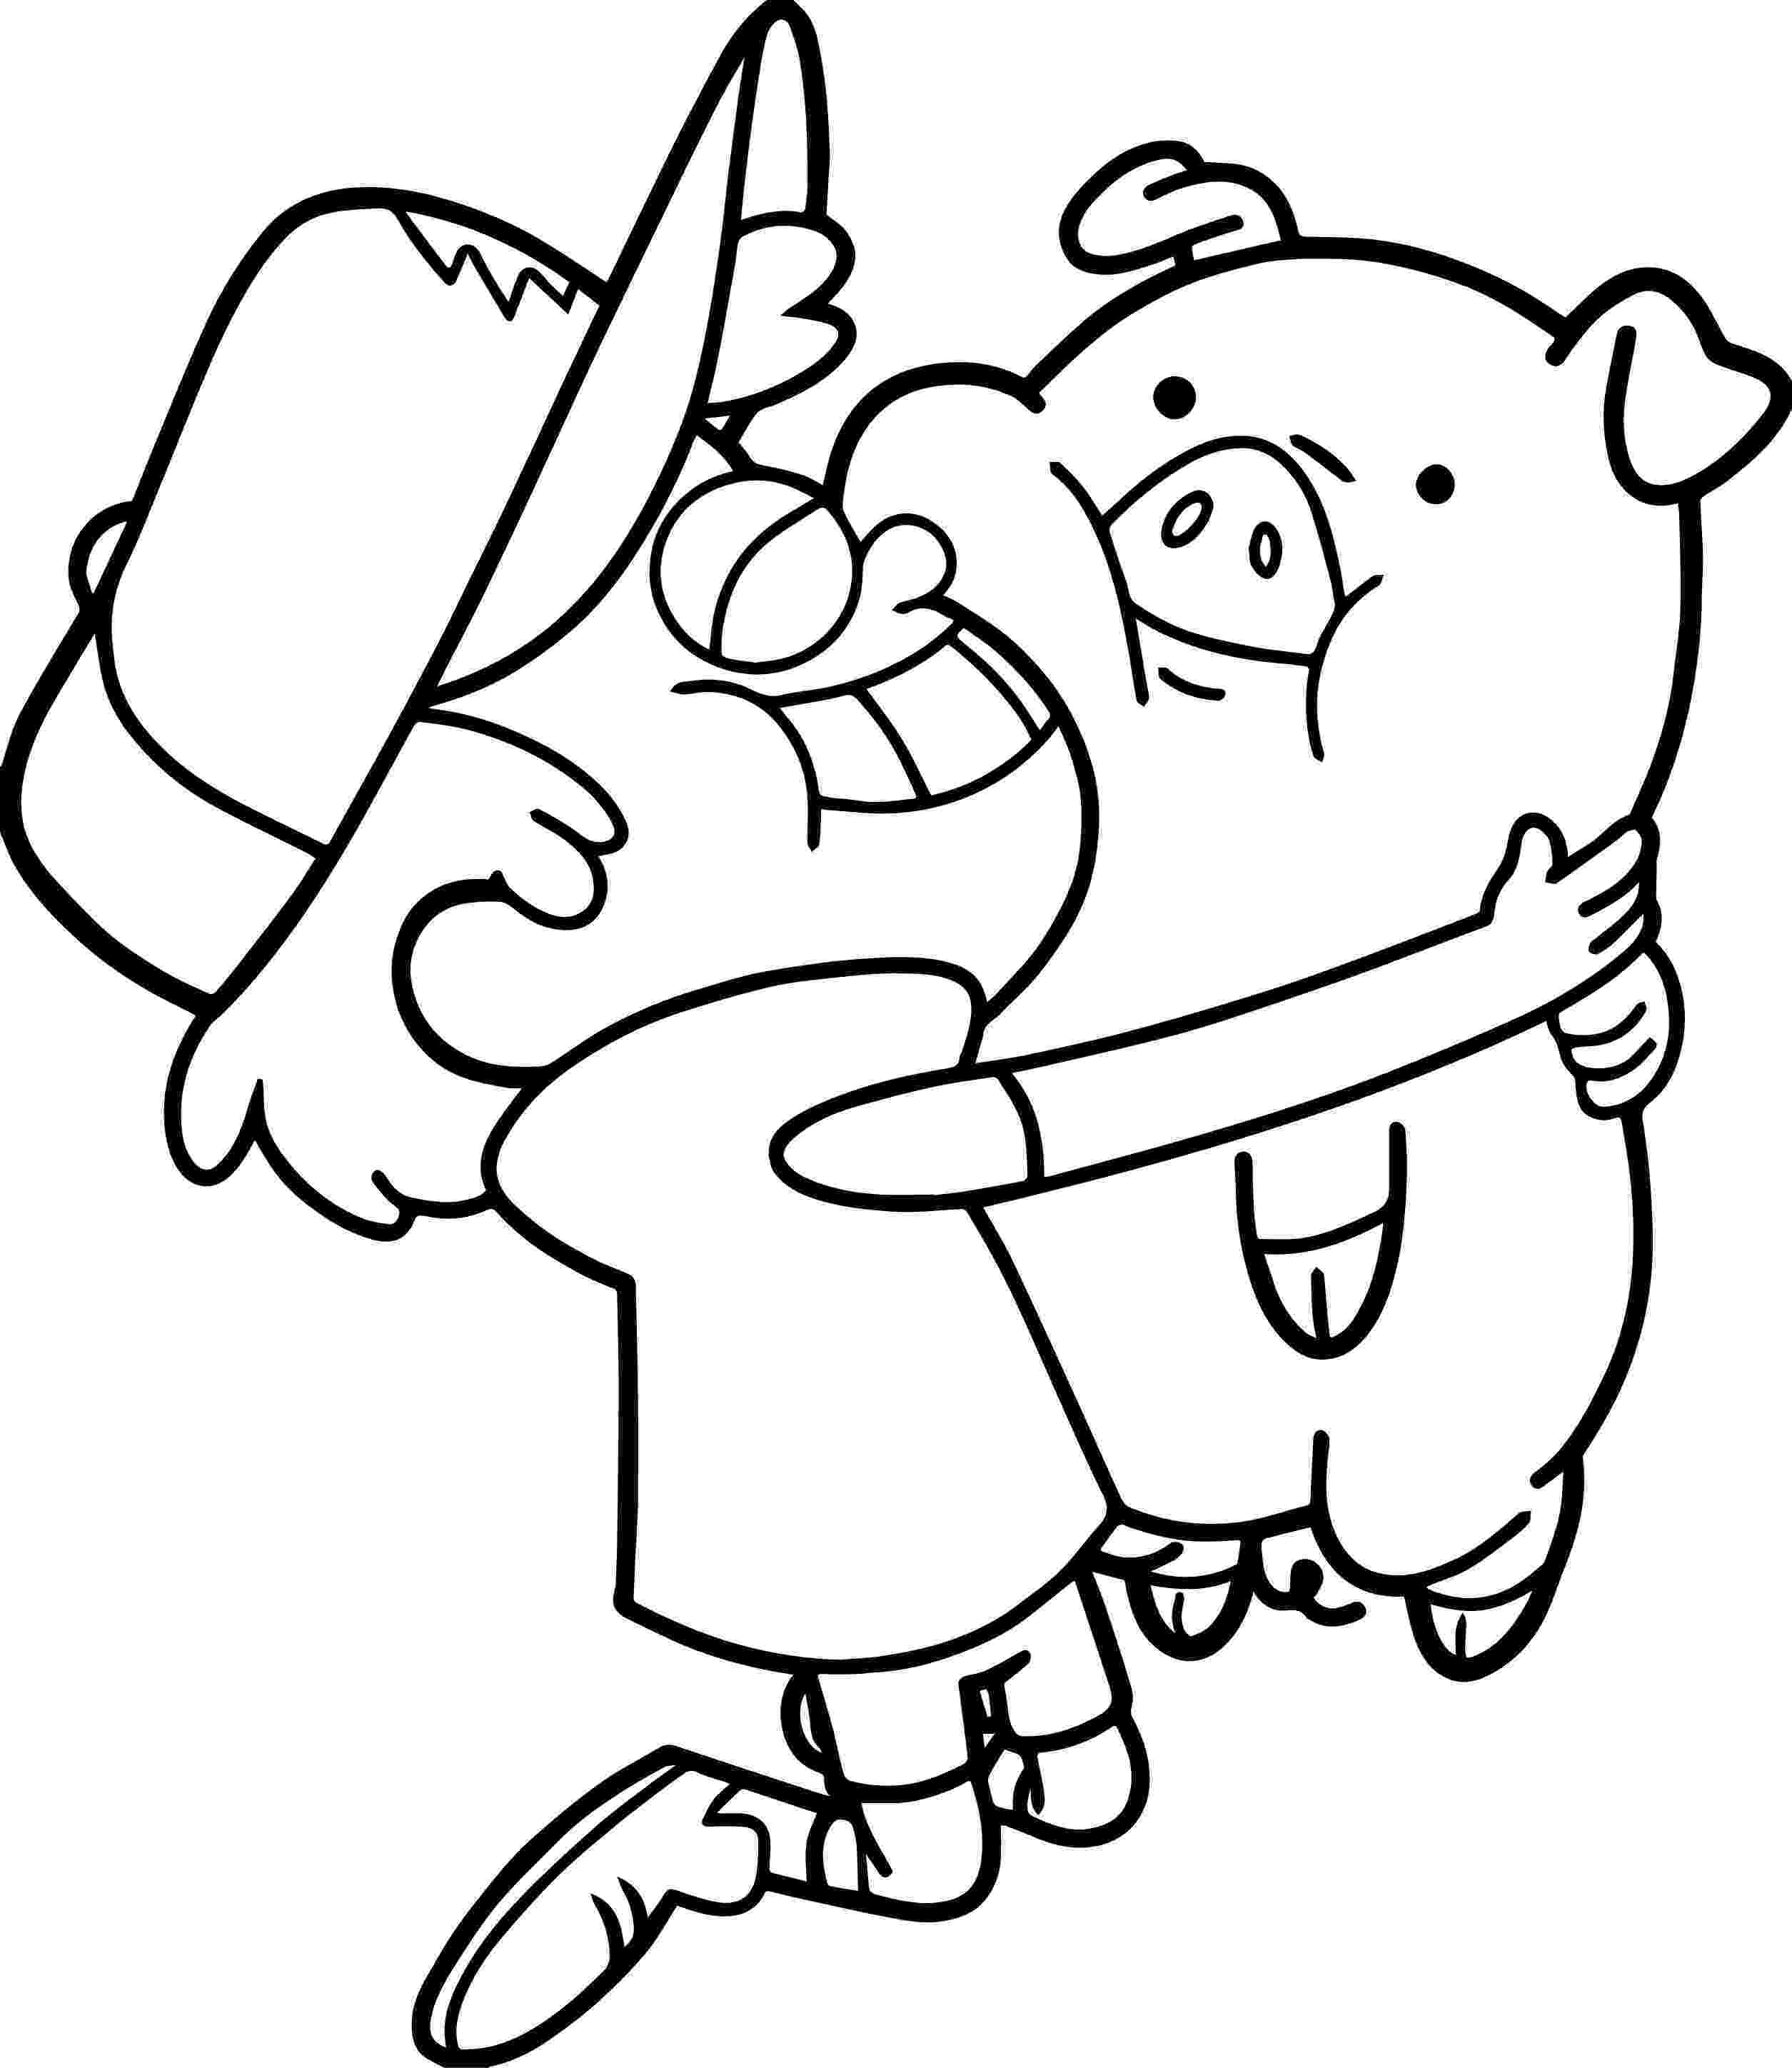 friendship coloring pages friendship coloring pages best coloring pages for kids friendship coloring pages 